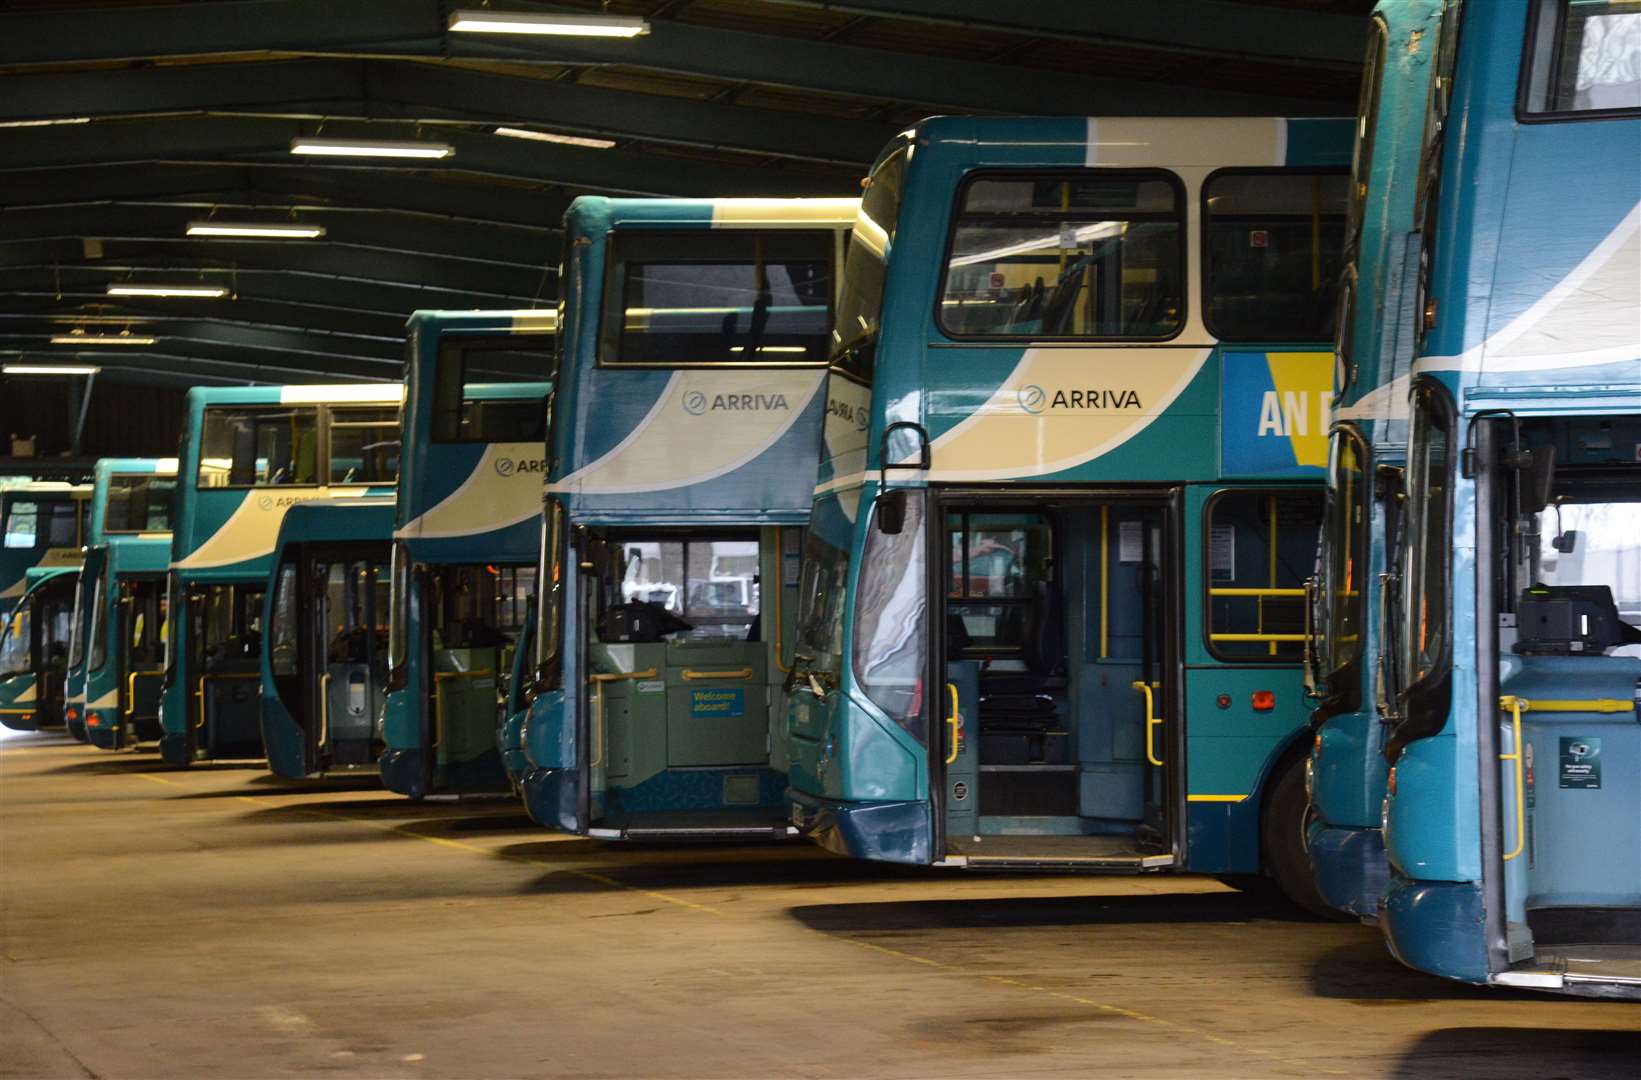 Arriva held its Luton Road service for the second time in three days after it was targeted by yobs with catapults